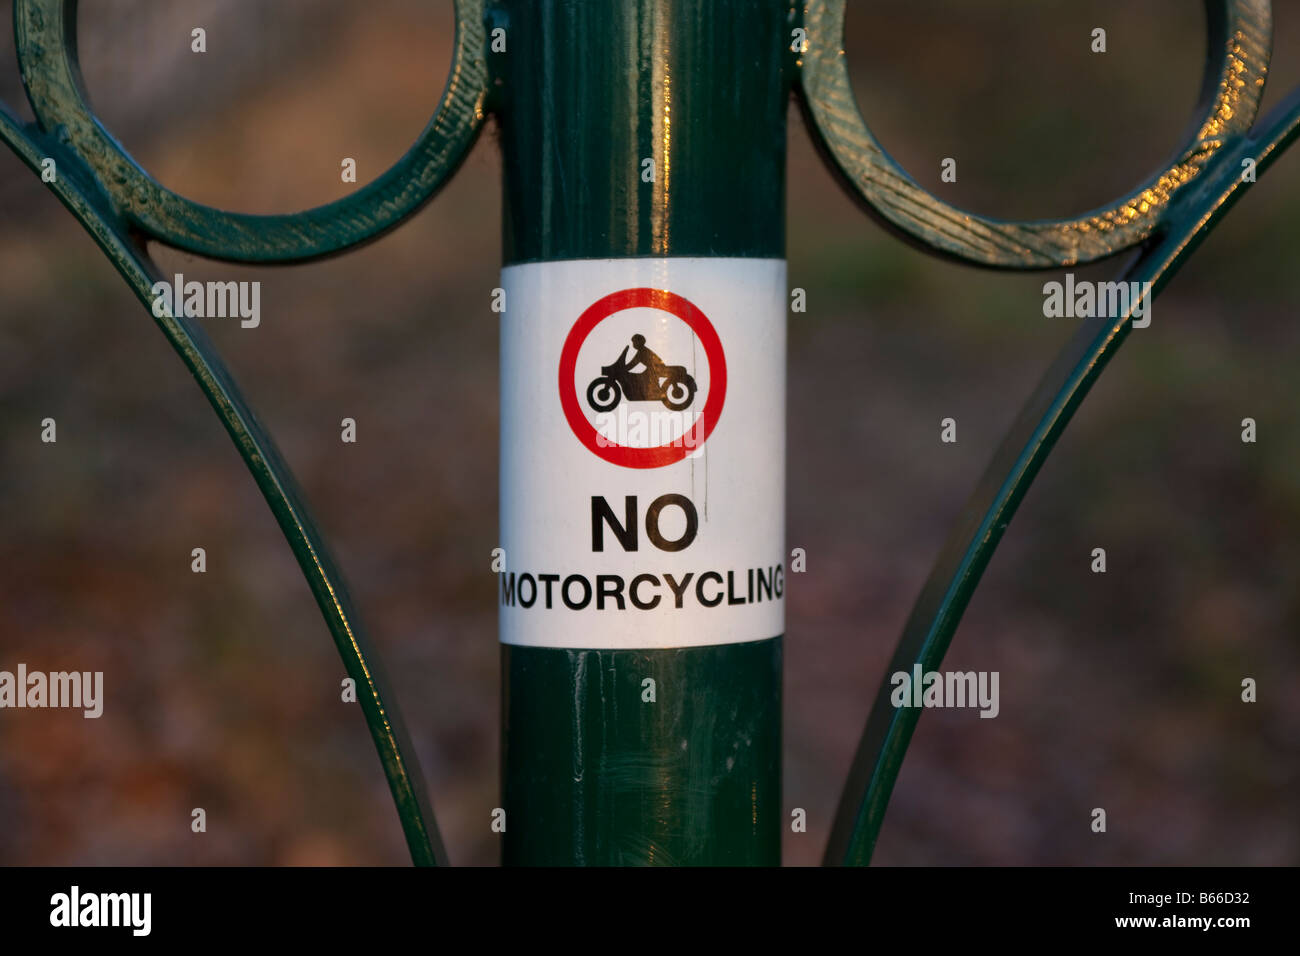 no motorcycling sign in south east london park Stock Photo